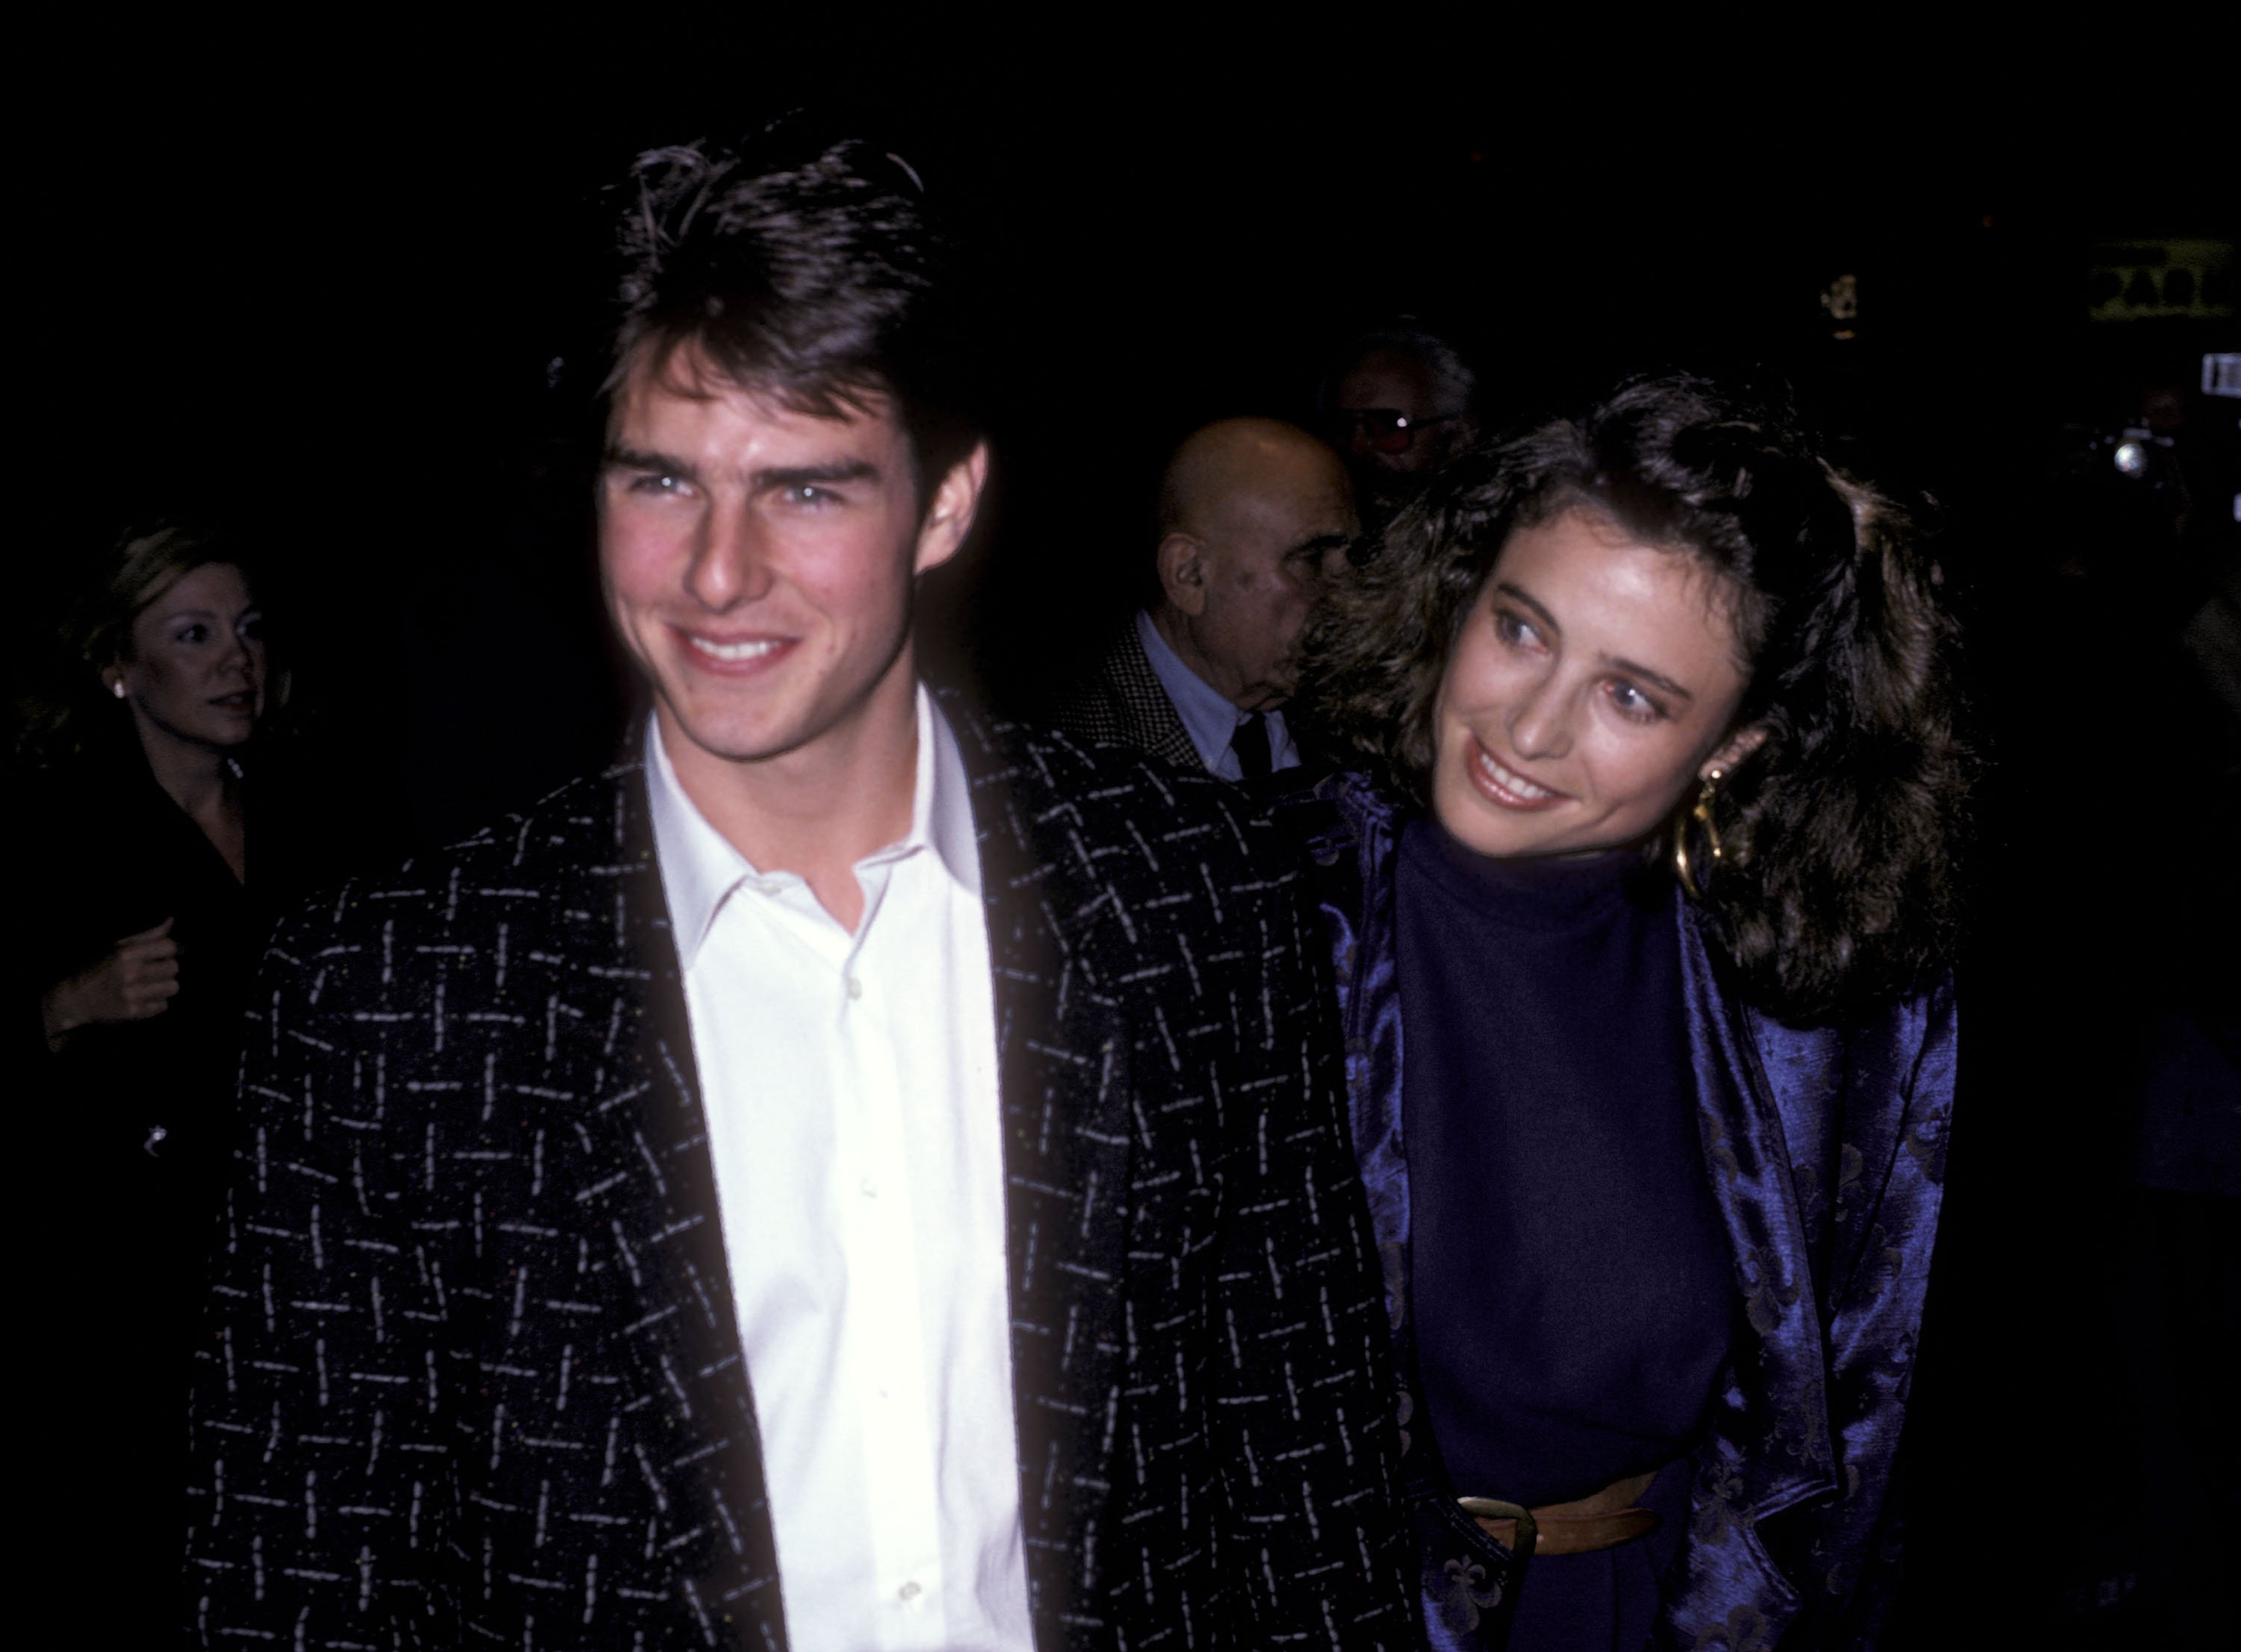 Tom Cruise und Mimi Rogers in New York 1986. | Quelle: Getty Images